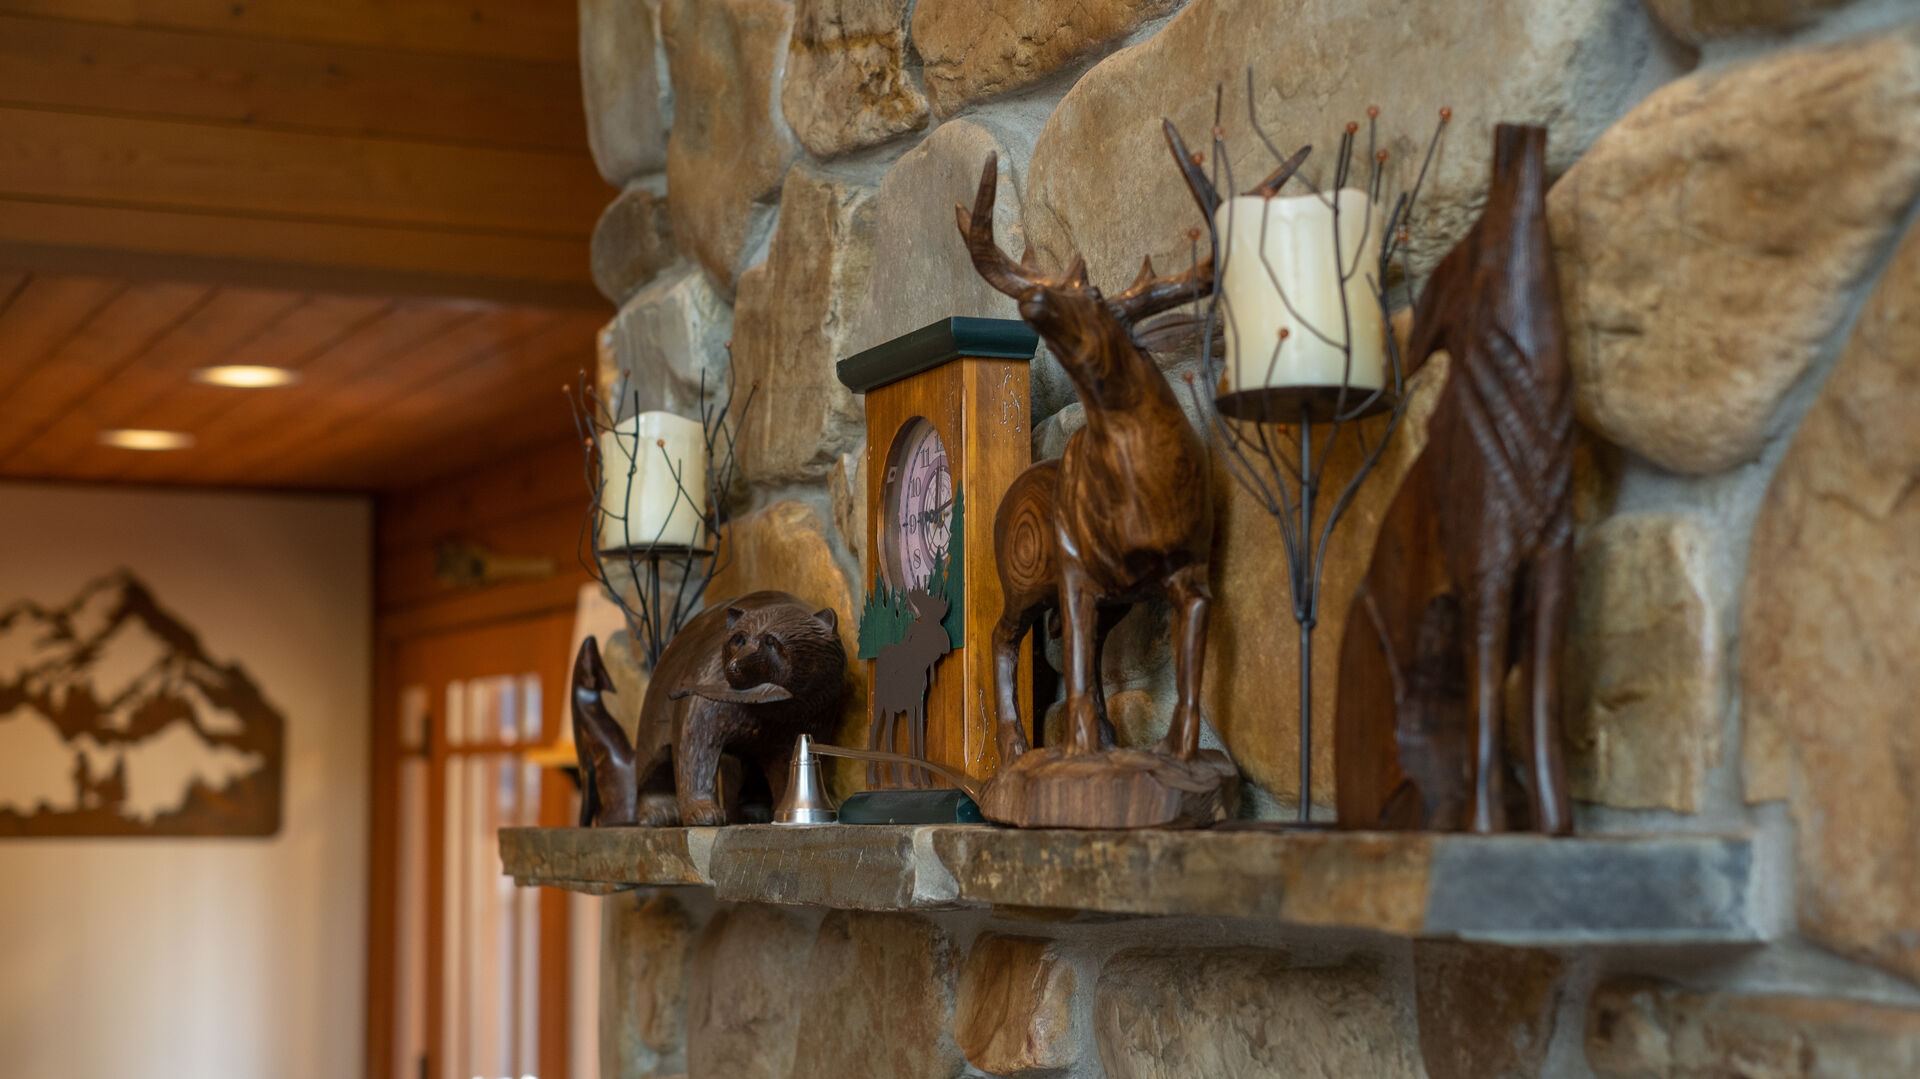 A wooden carved bear and moose on the mantle